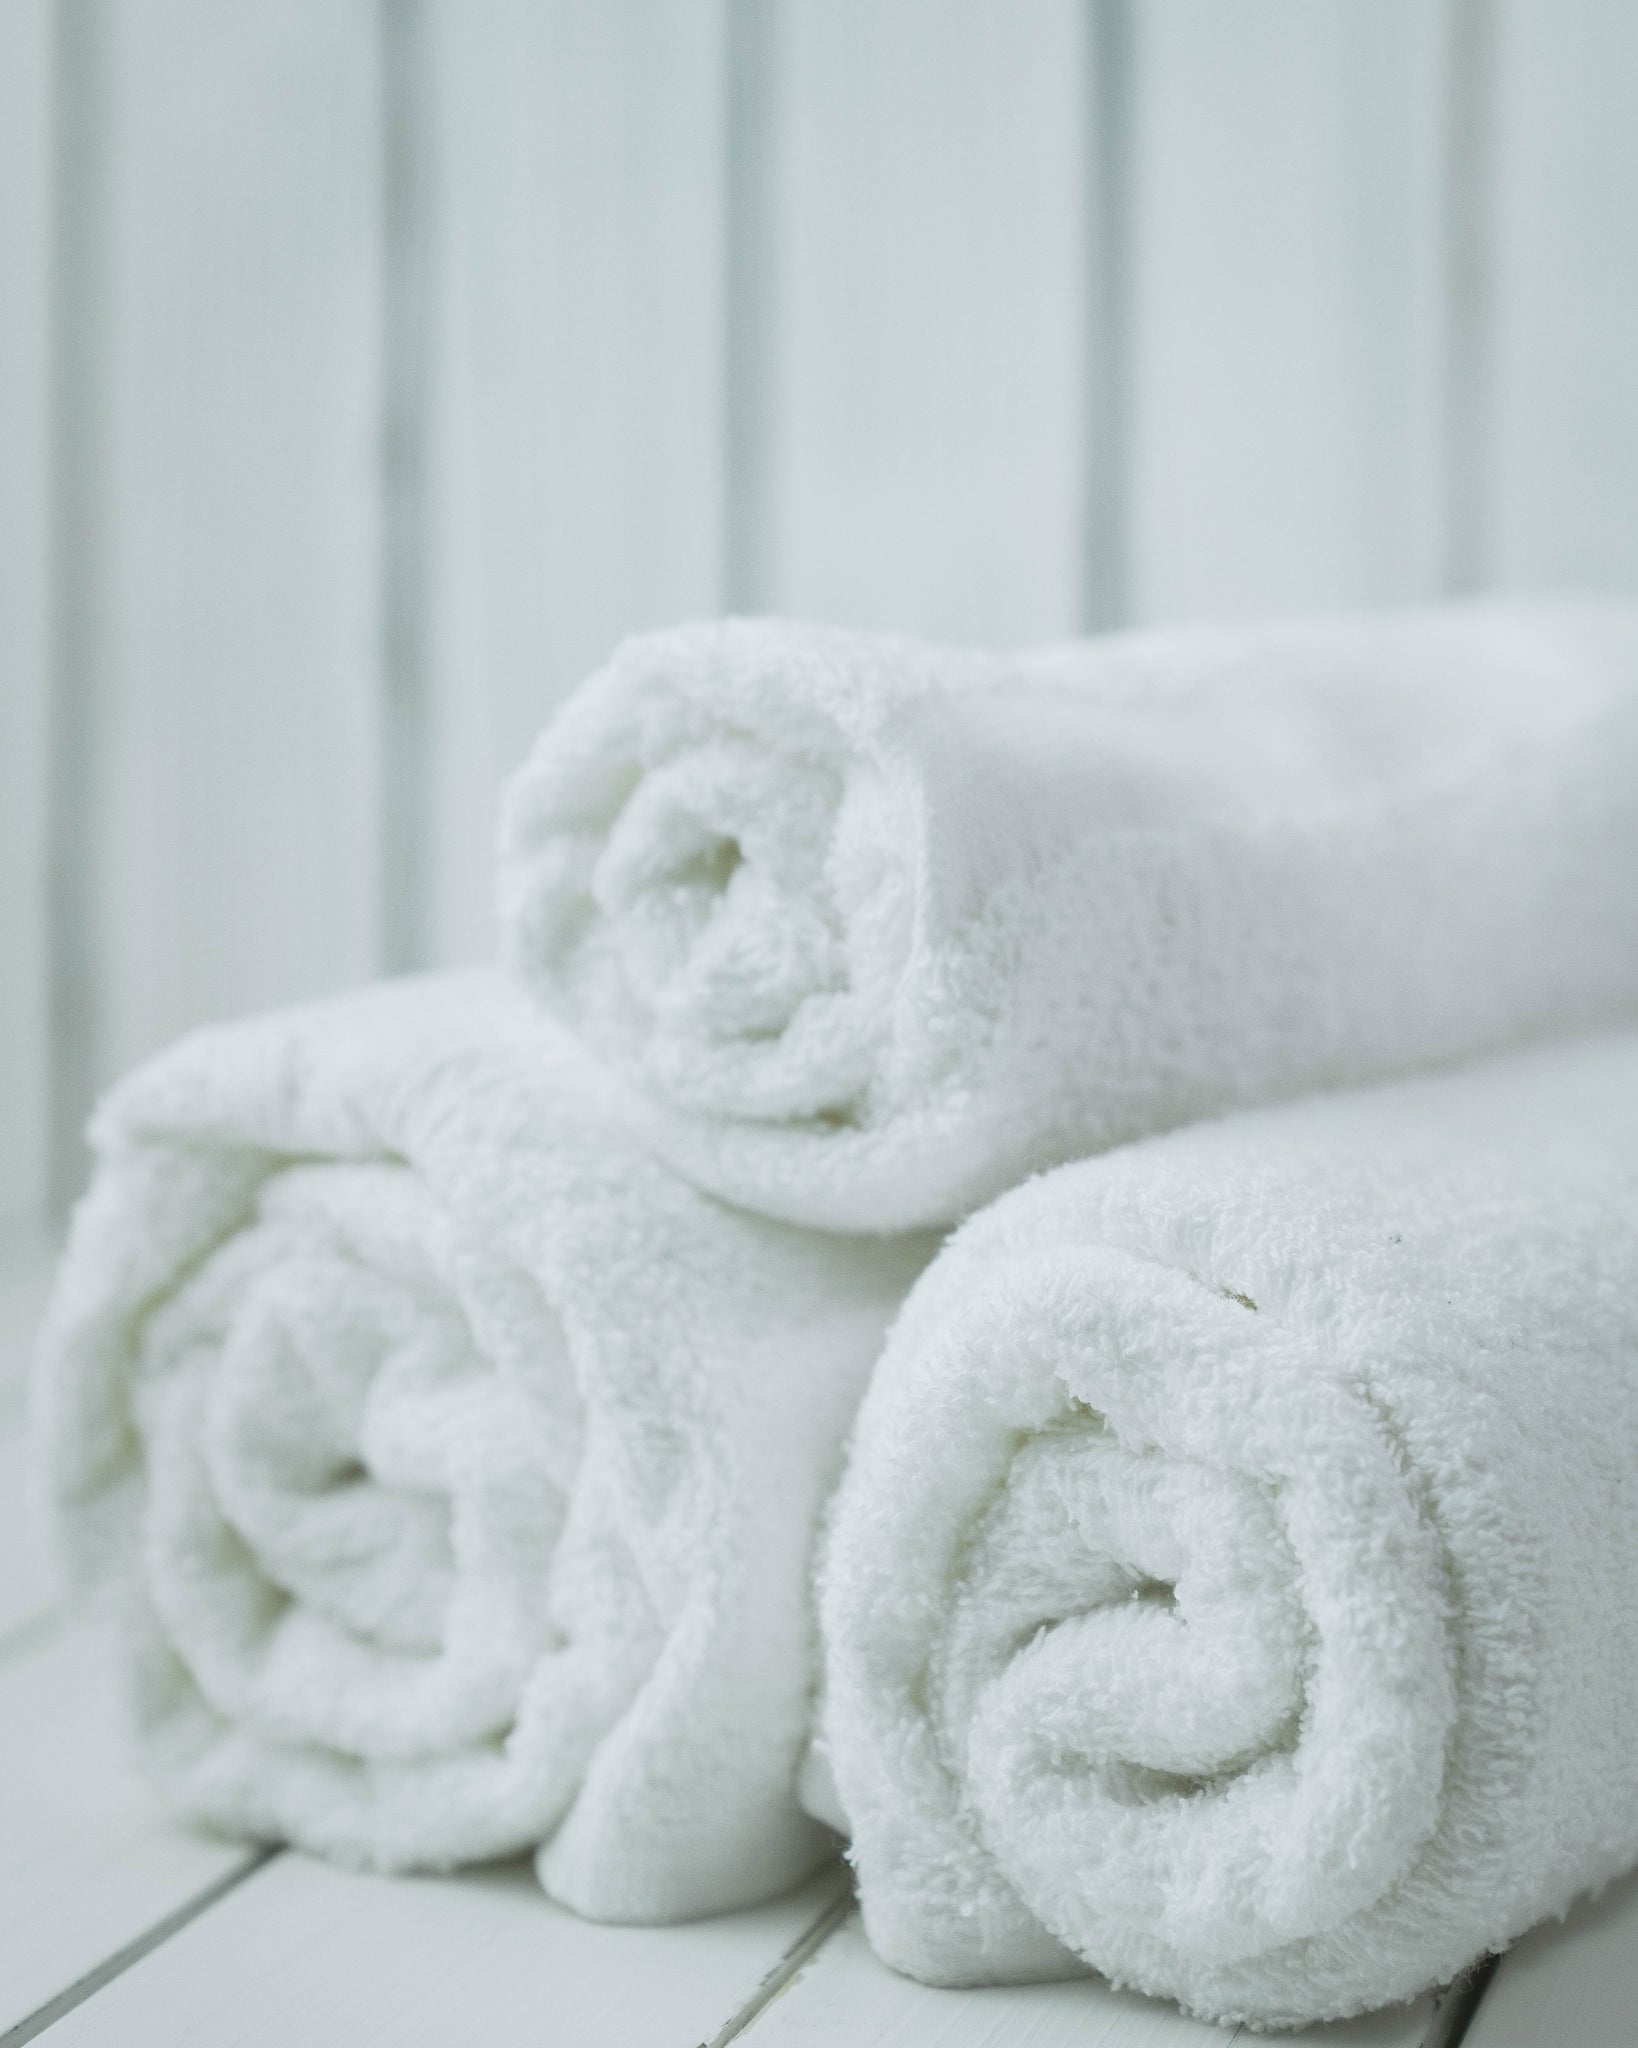 Imperial Towel Collection White Premium Quality